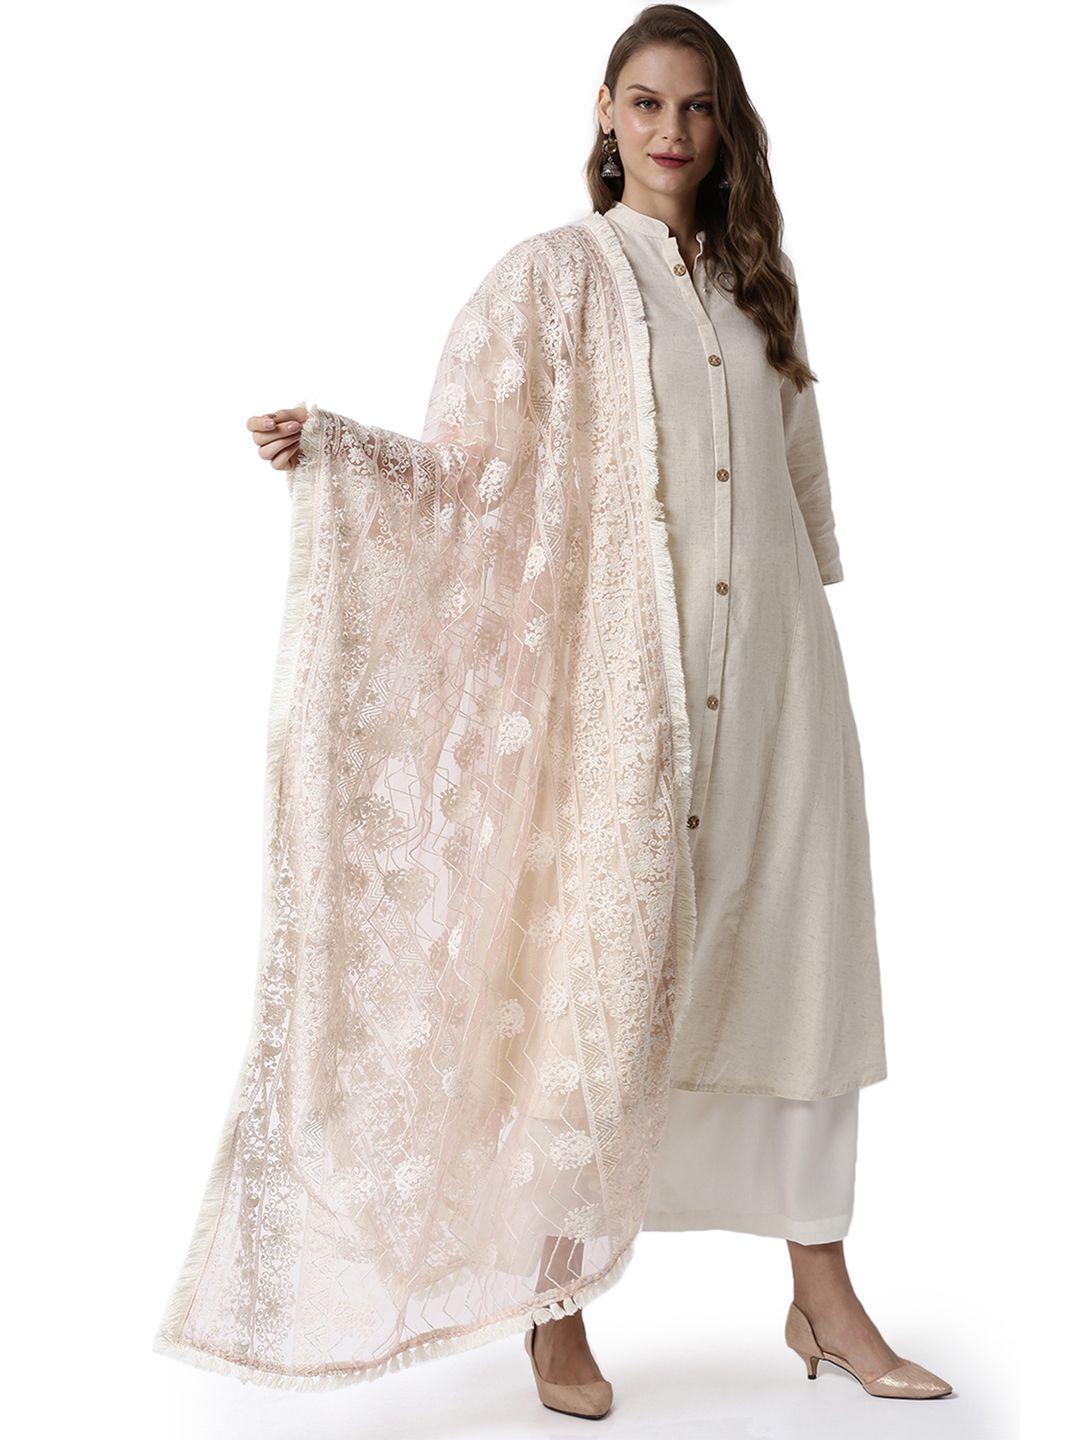 soch-white-&-silver-toned-embroidered-dupatta